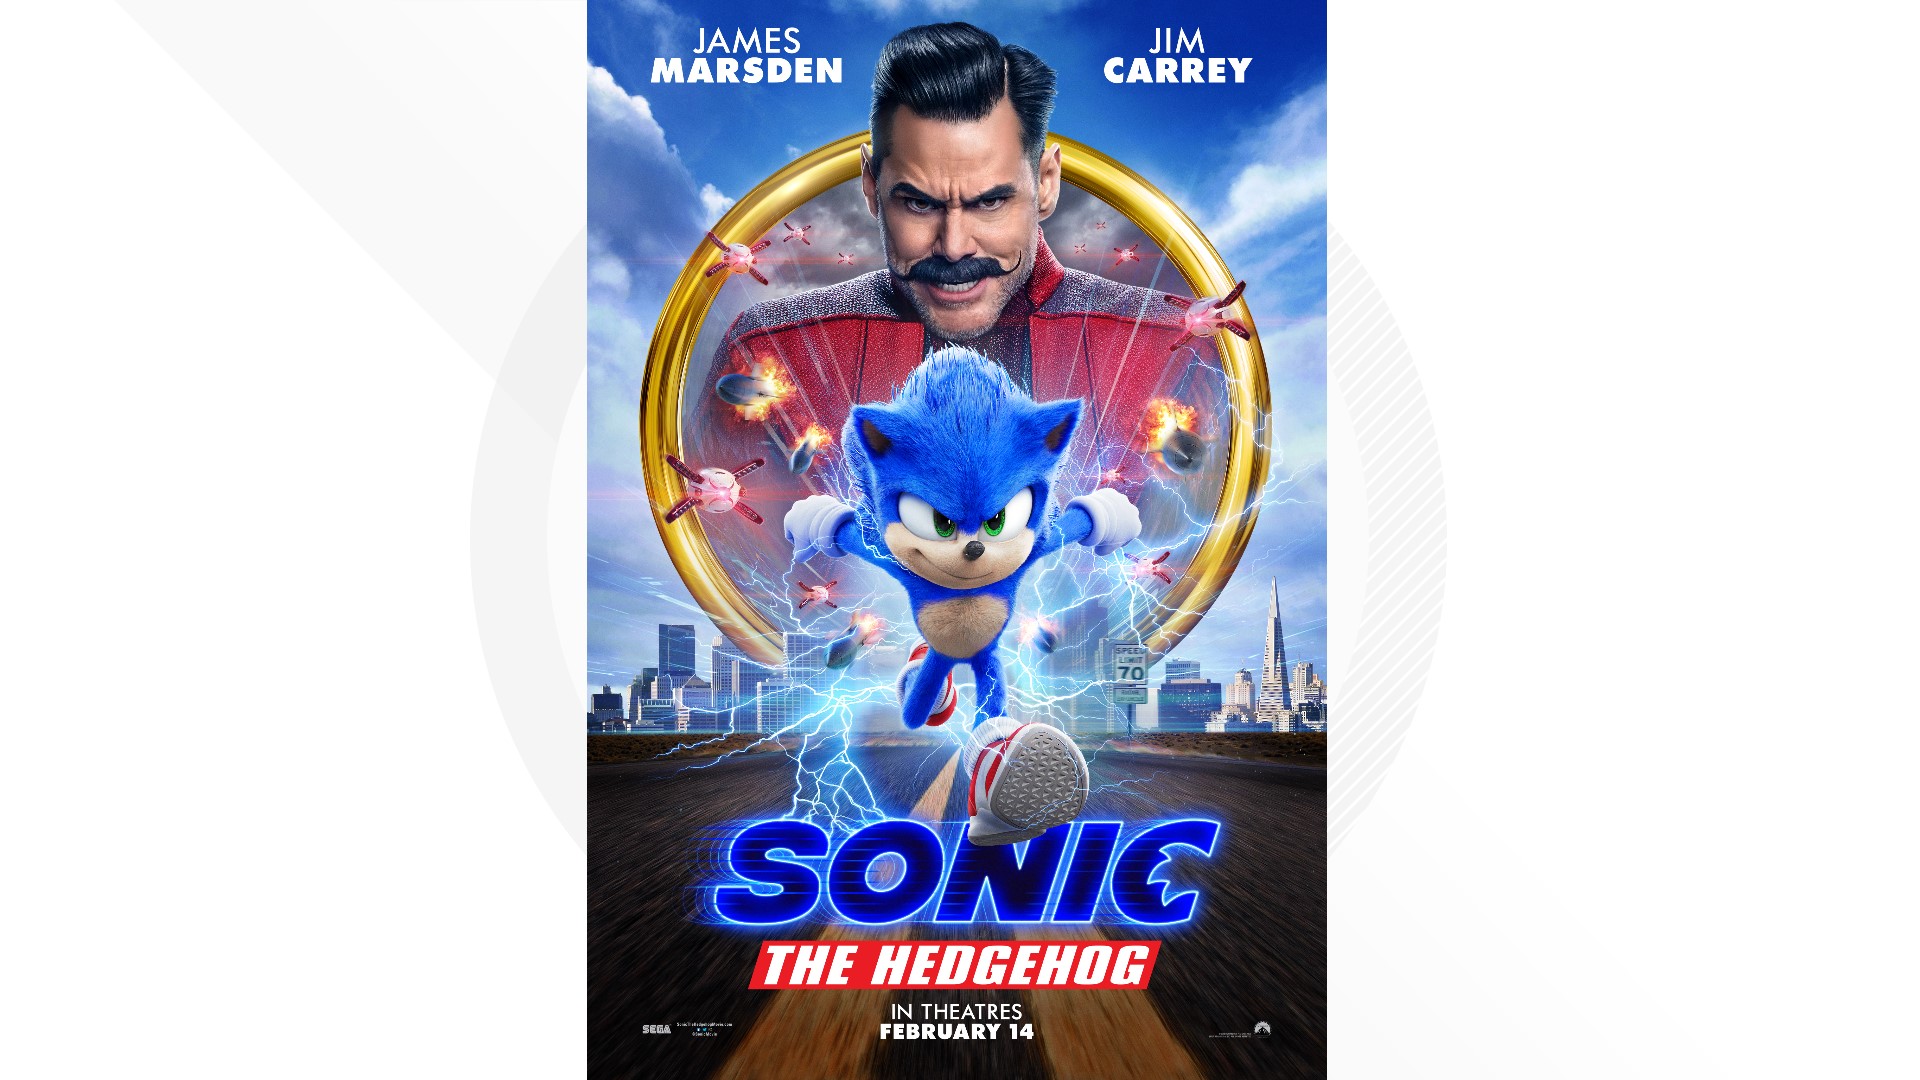 Sonic the Hedgehog, Down Hill, The Photograph and more hit the big screen this weekend. This is what Director Shawn Hobbs thought about the movies.